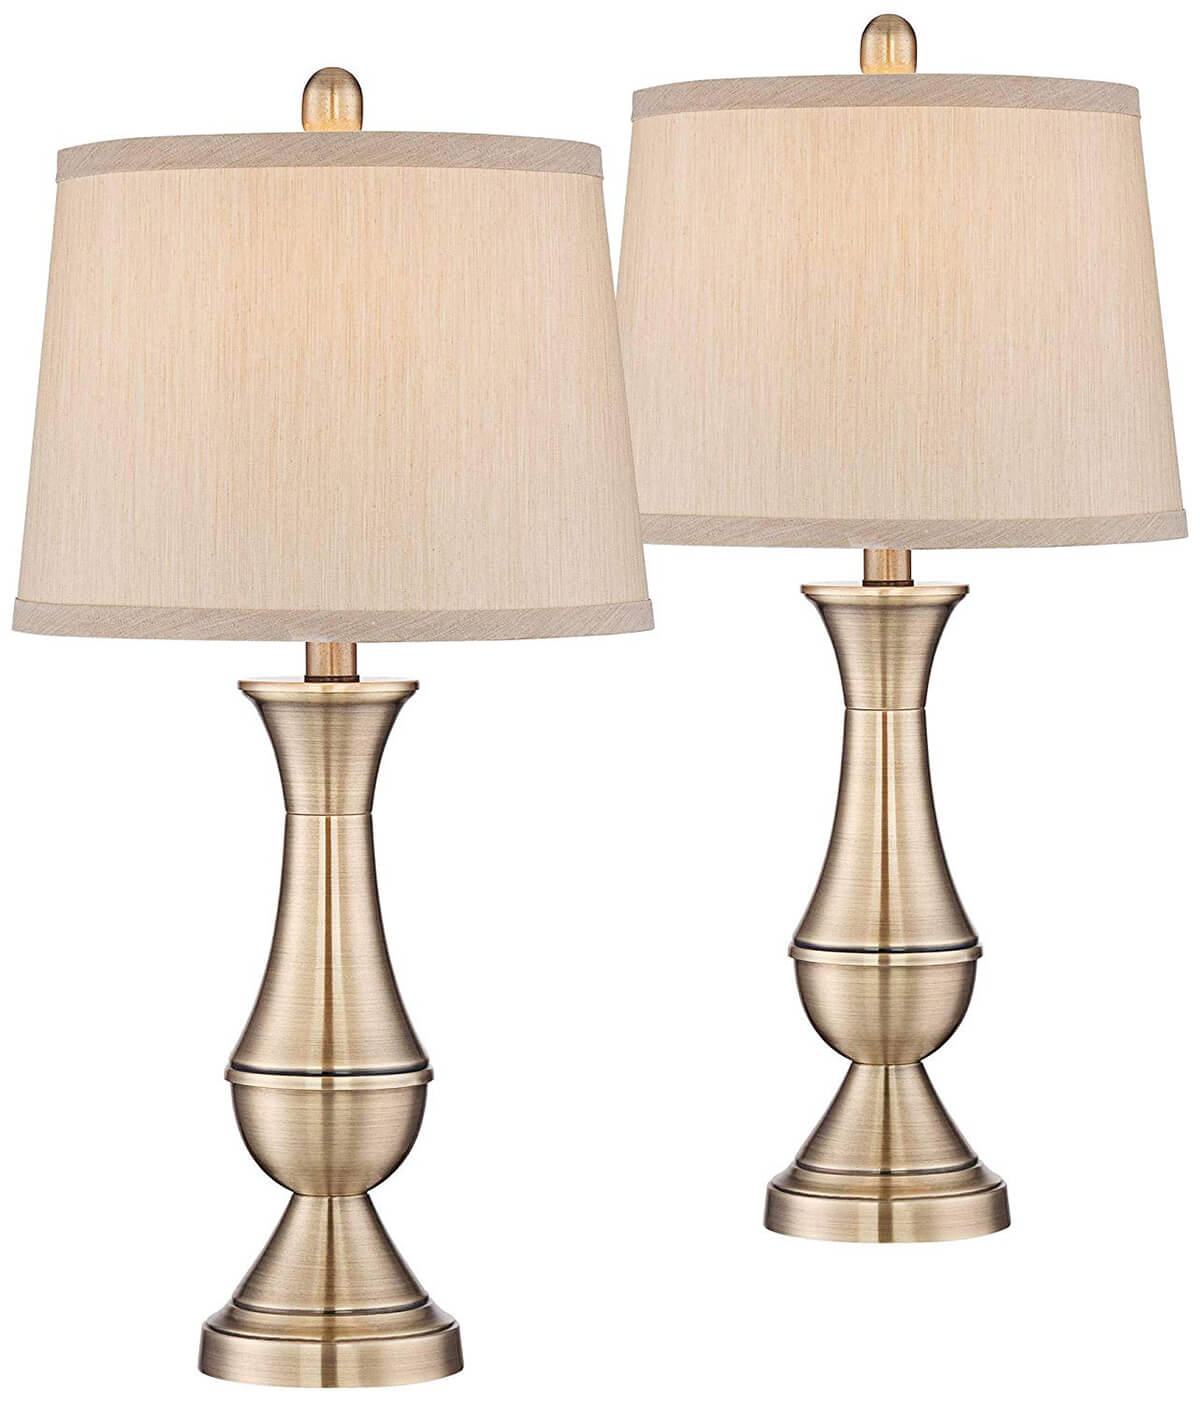 25 Best Bedside Table Lamps To Light Up, Nite Table Lamps